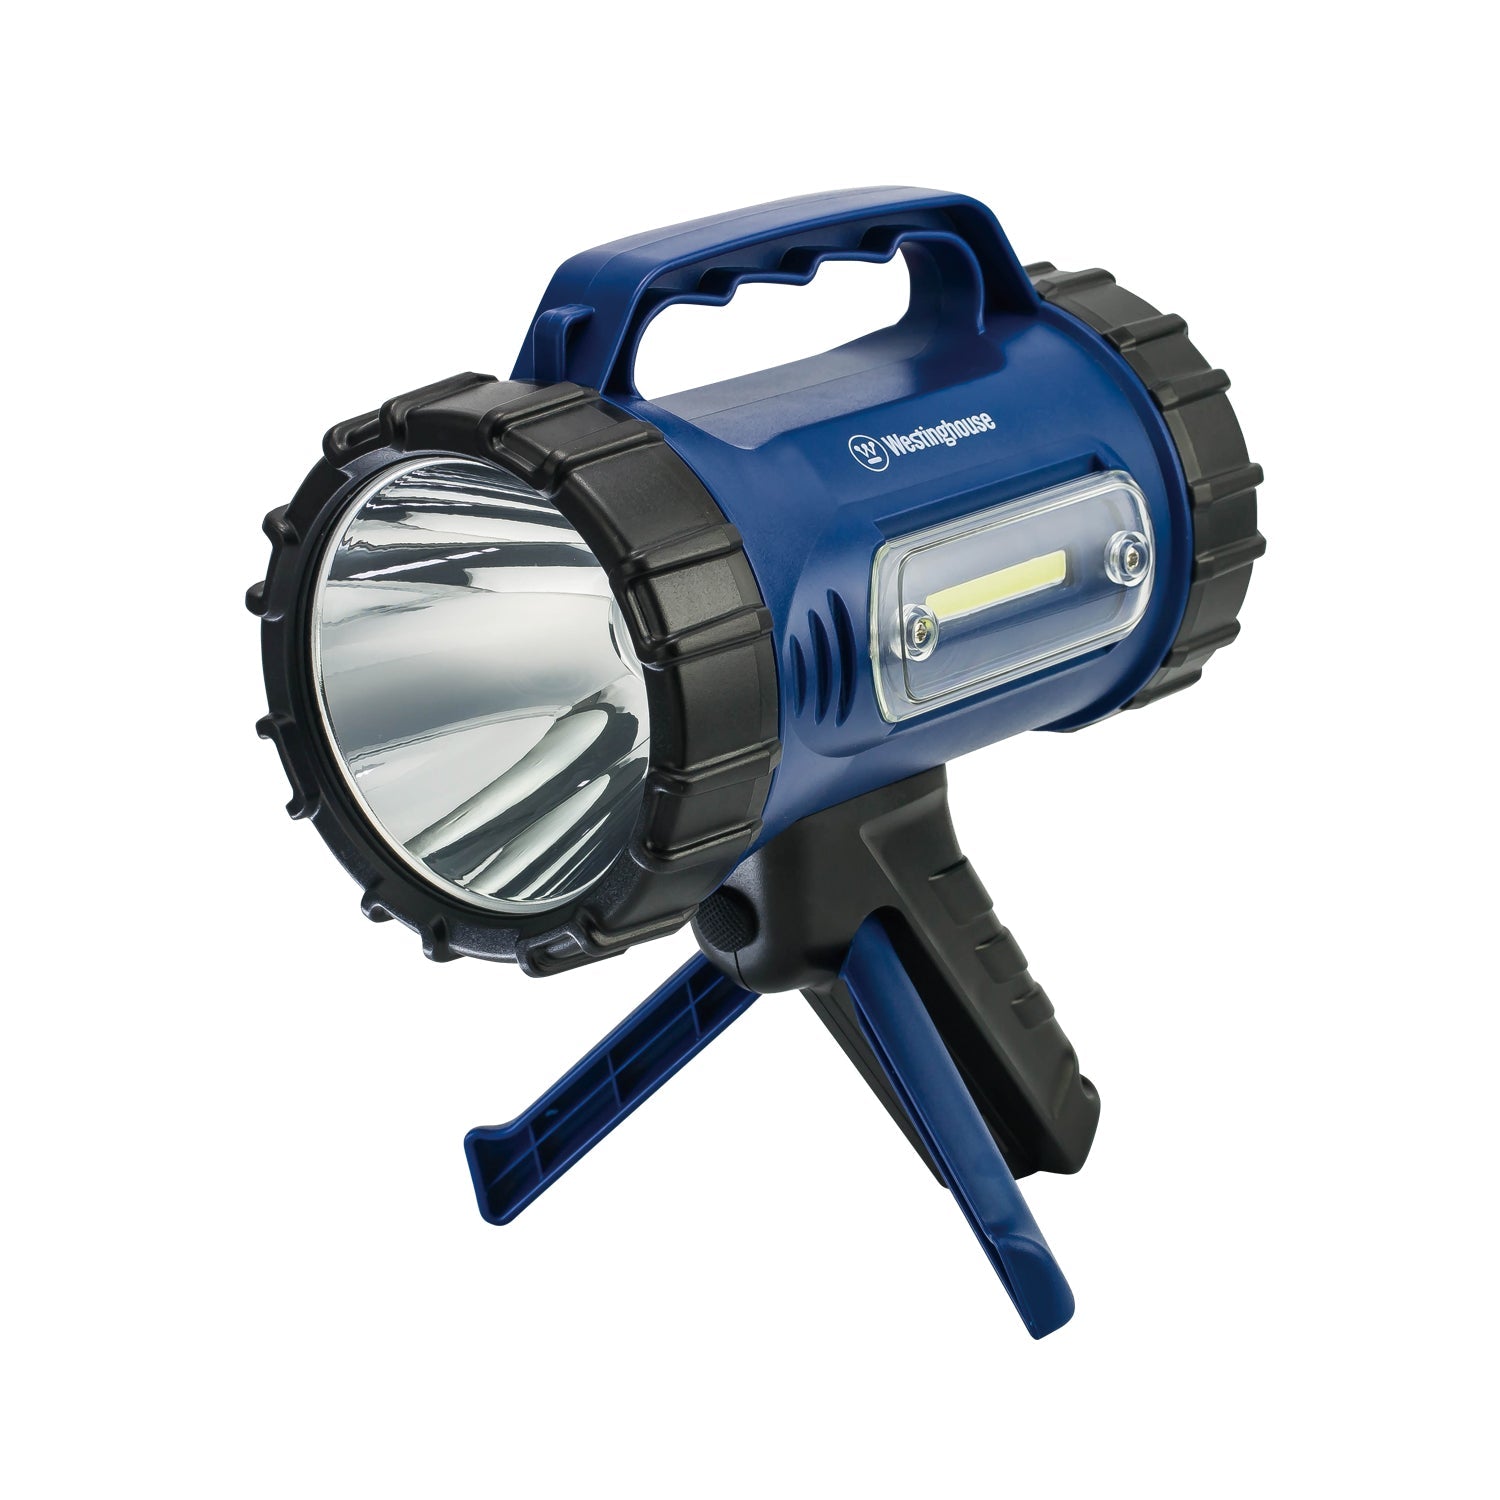 Westinghouse 3-in-1 Search Light, Area Light, and Mobile Power